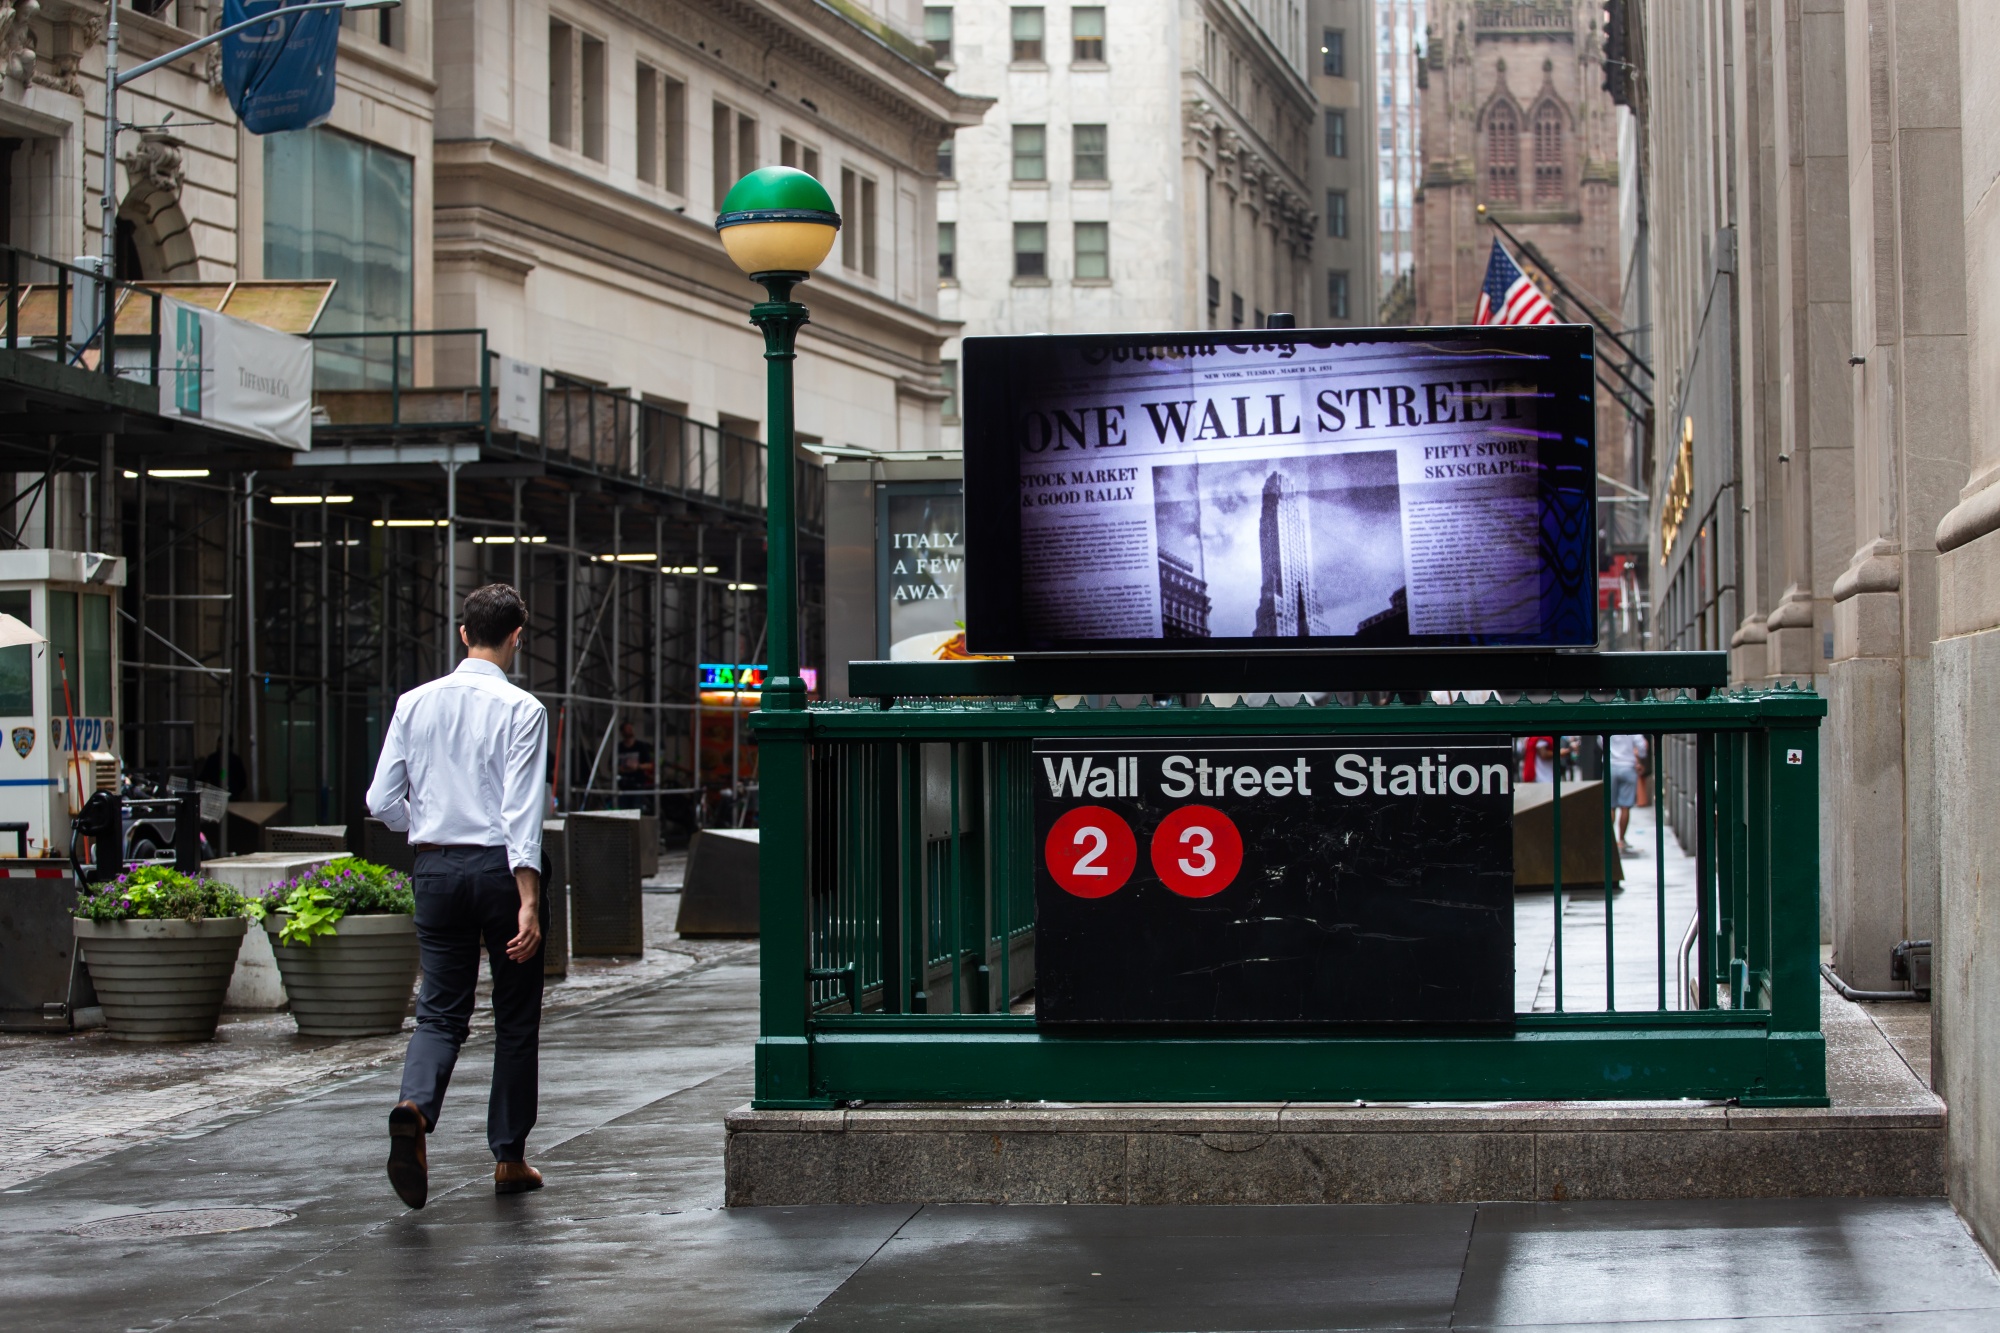 A Wall Street subway station near the New York Stock Exchange.